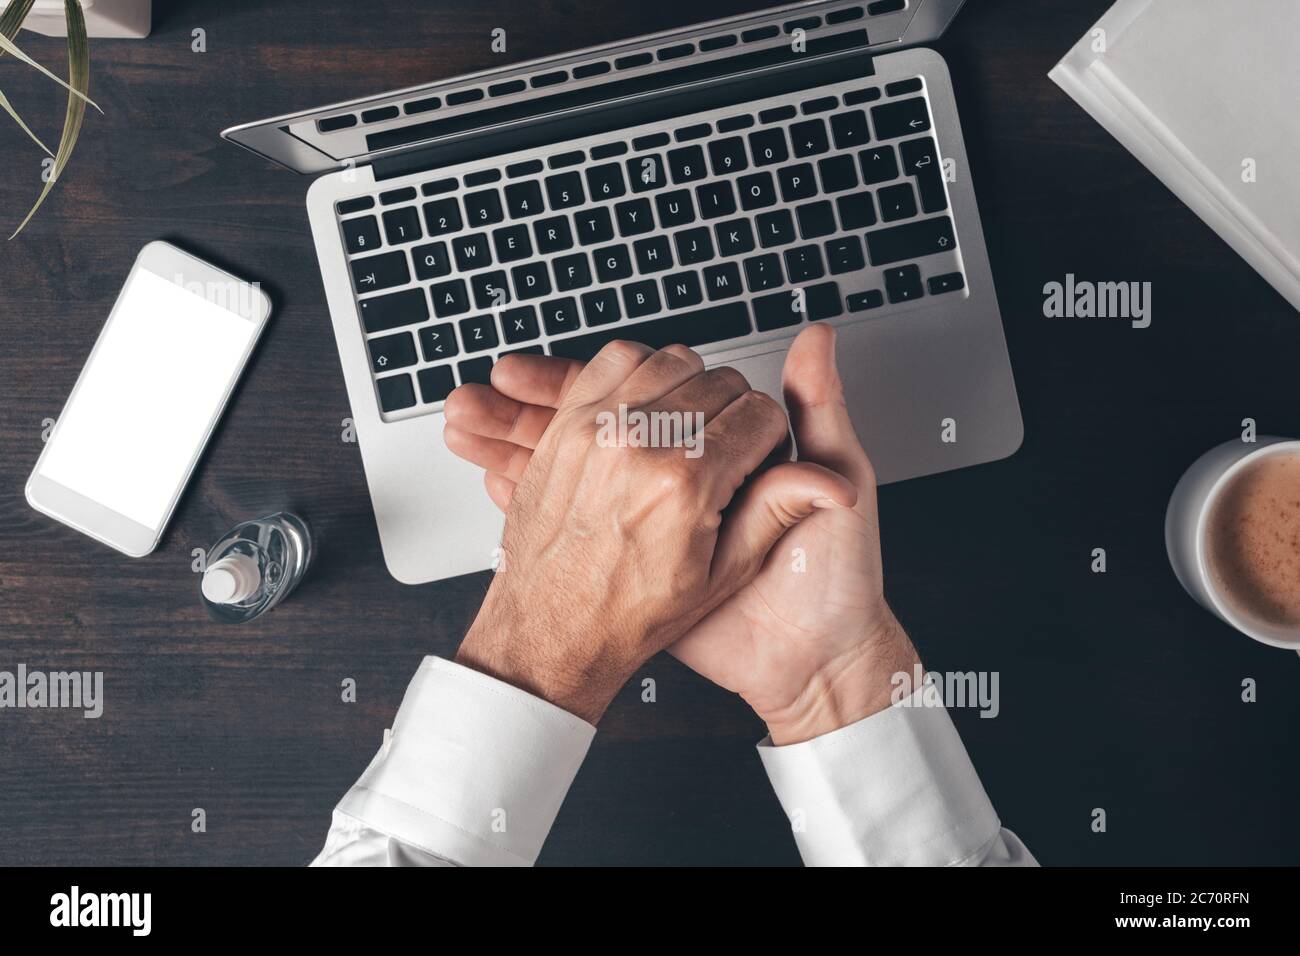 Businessman disinfecting hands while working office desk, top view Stock Photo